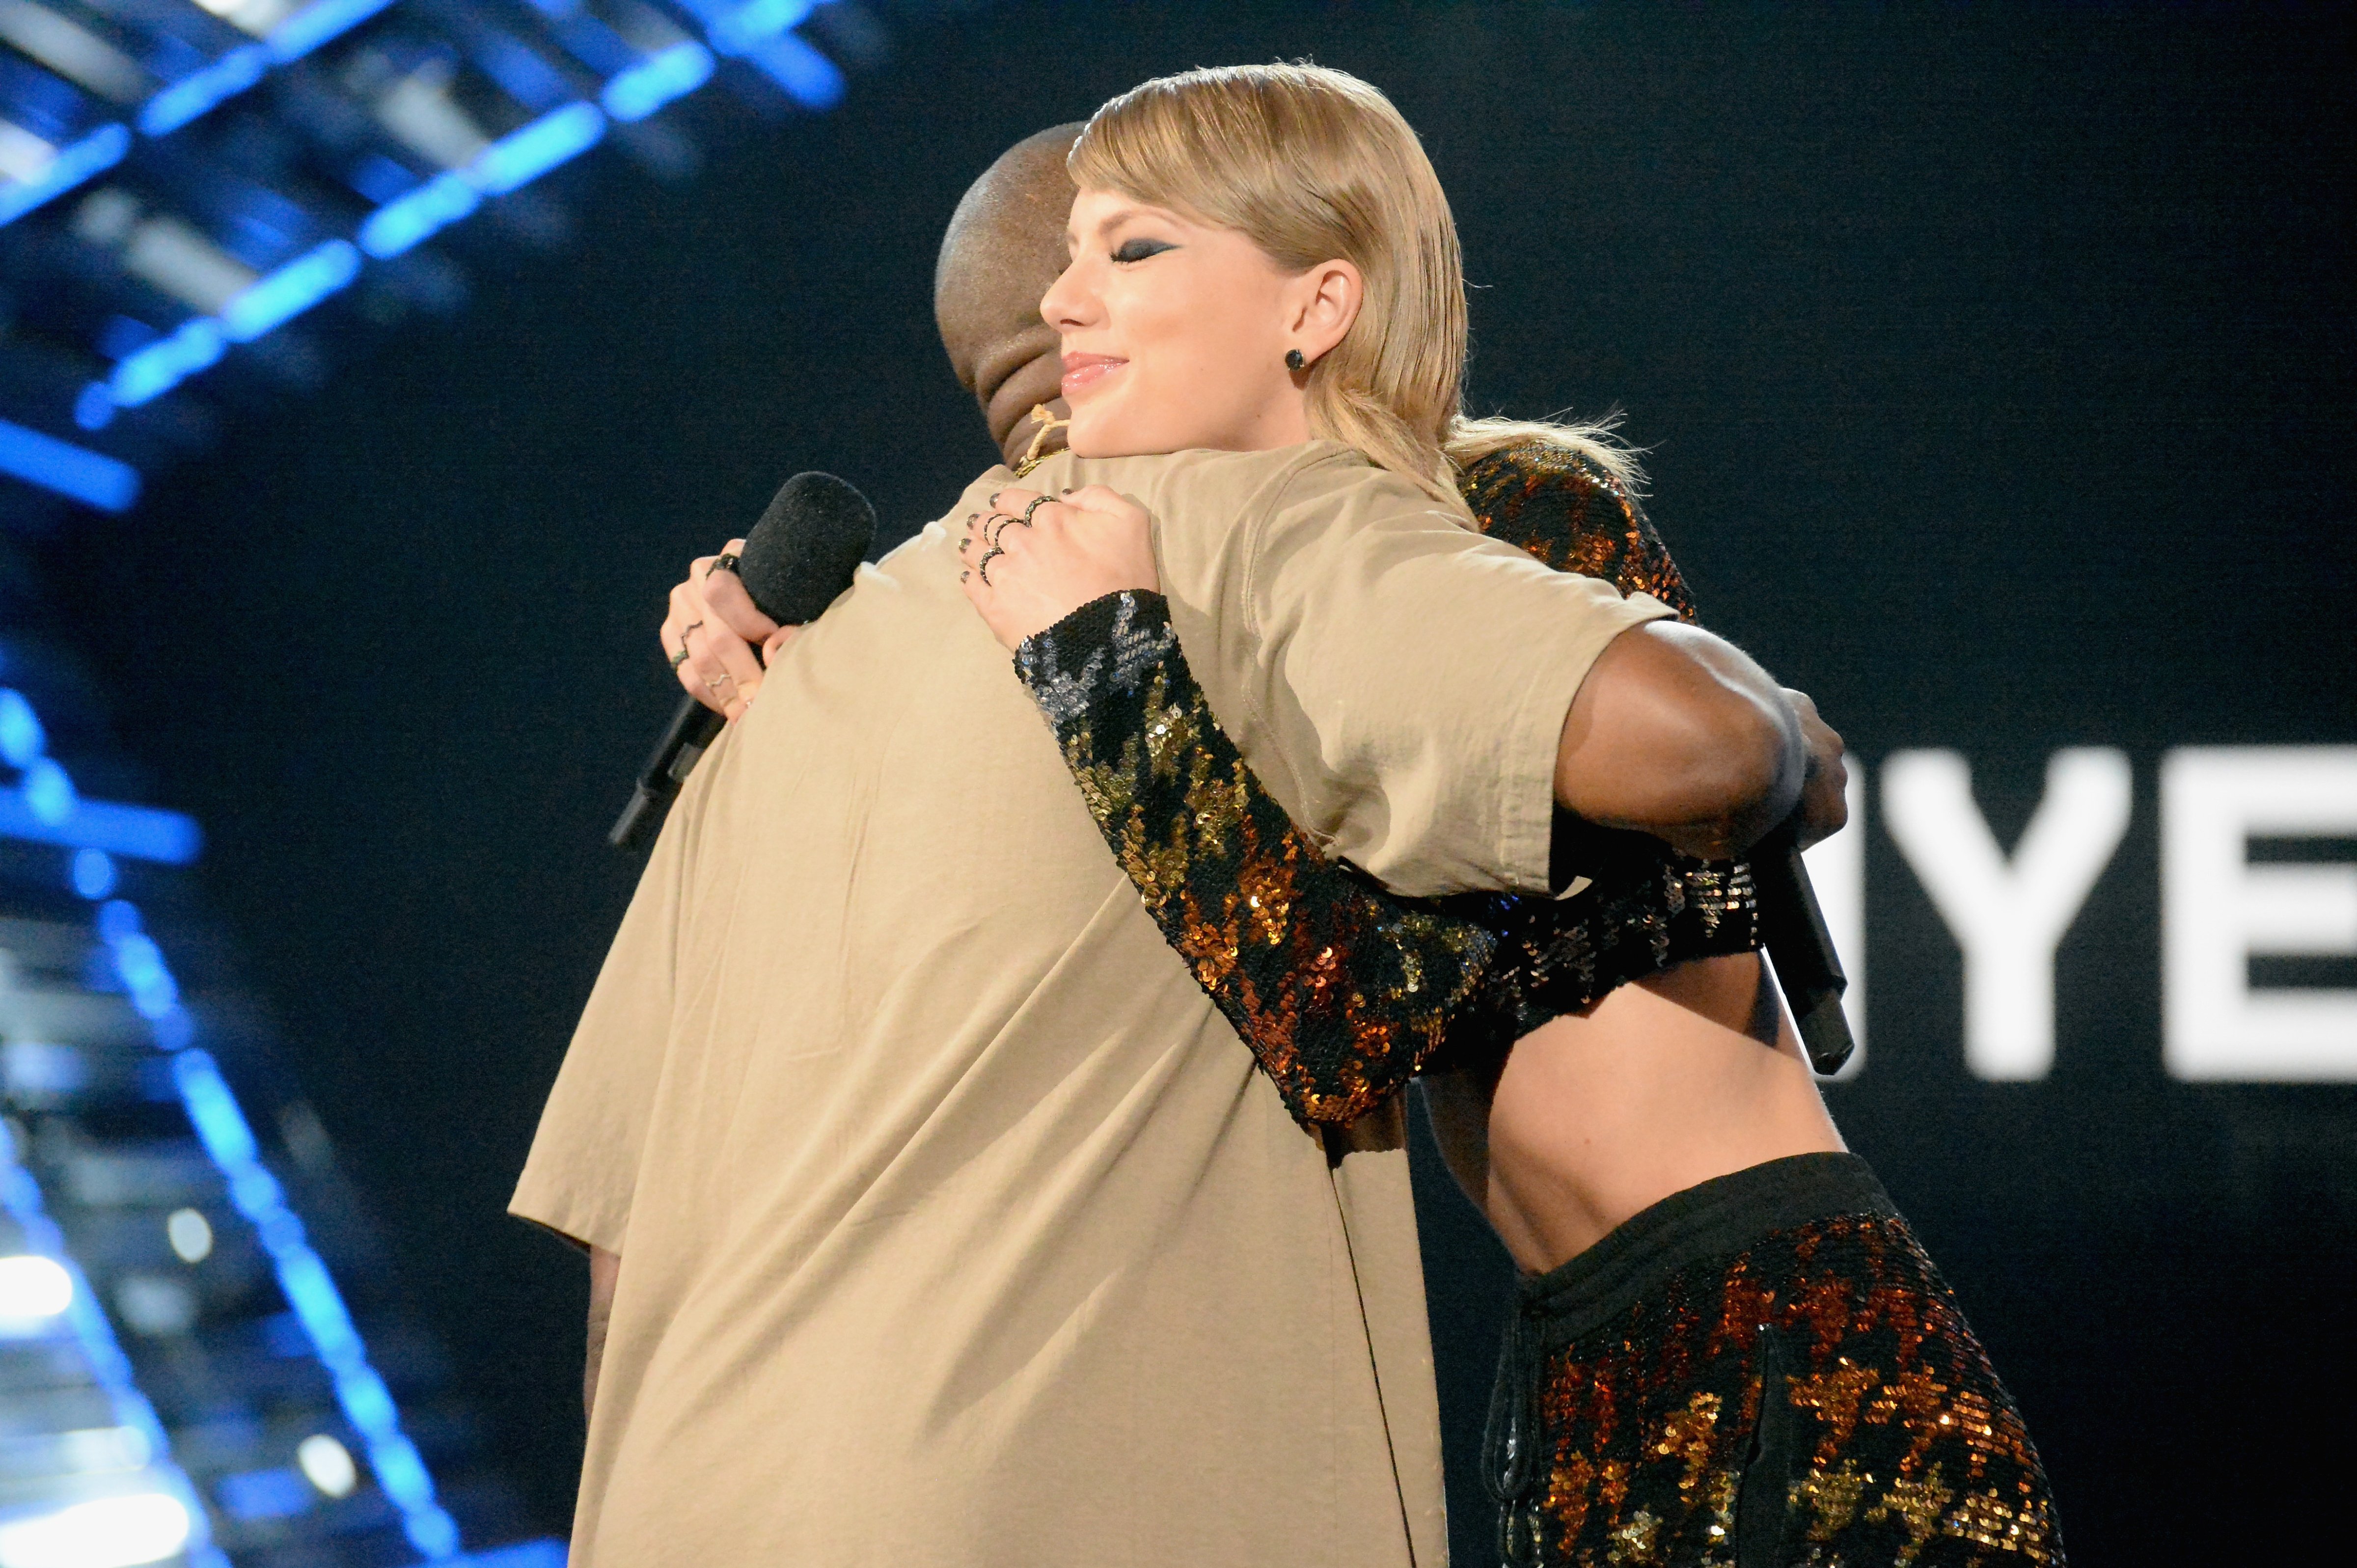 Kanye West accepts the Michael Jackson Video Vanguard Award from Taylor Swift during the 2015 MTV Video Music Awards on Aug. 30, 2015. (Jeff Kravitz—MTV/ Getty)